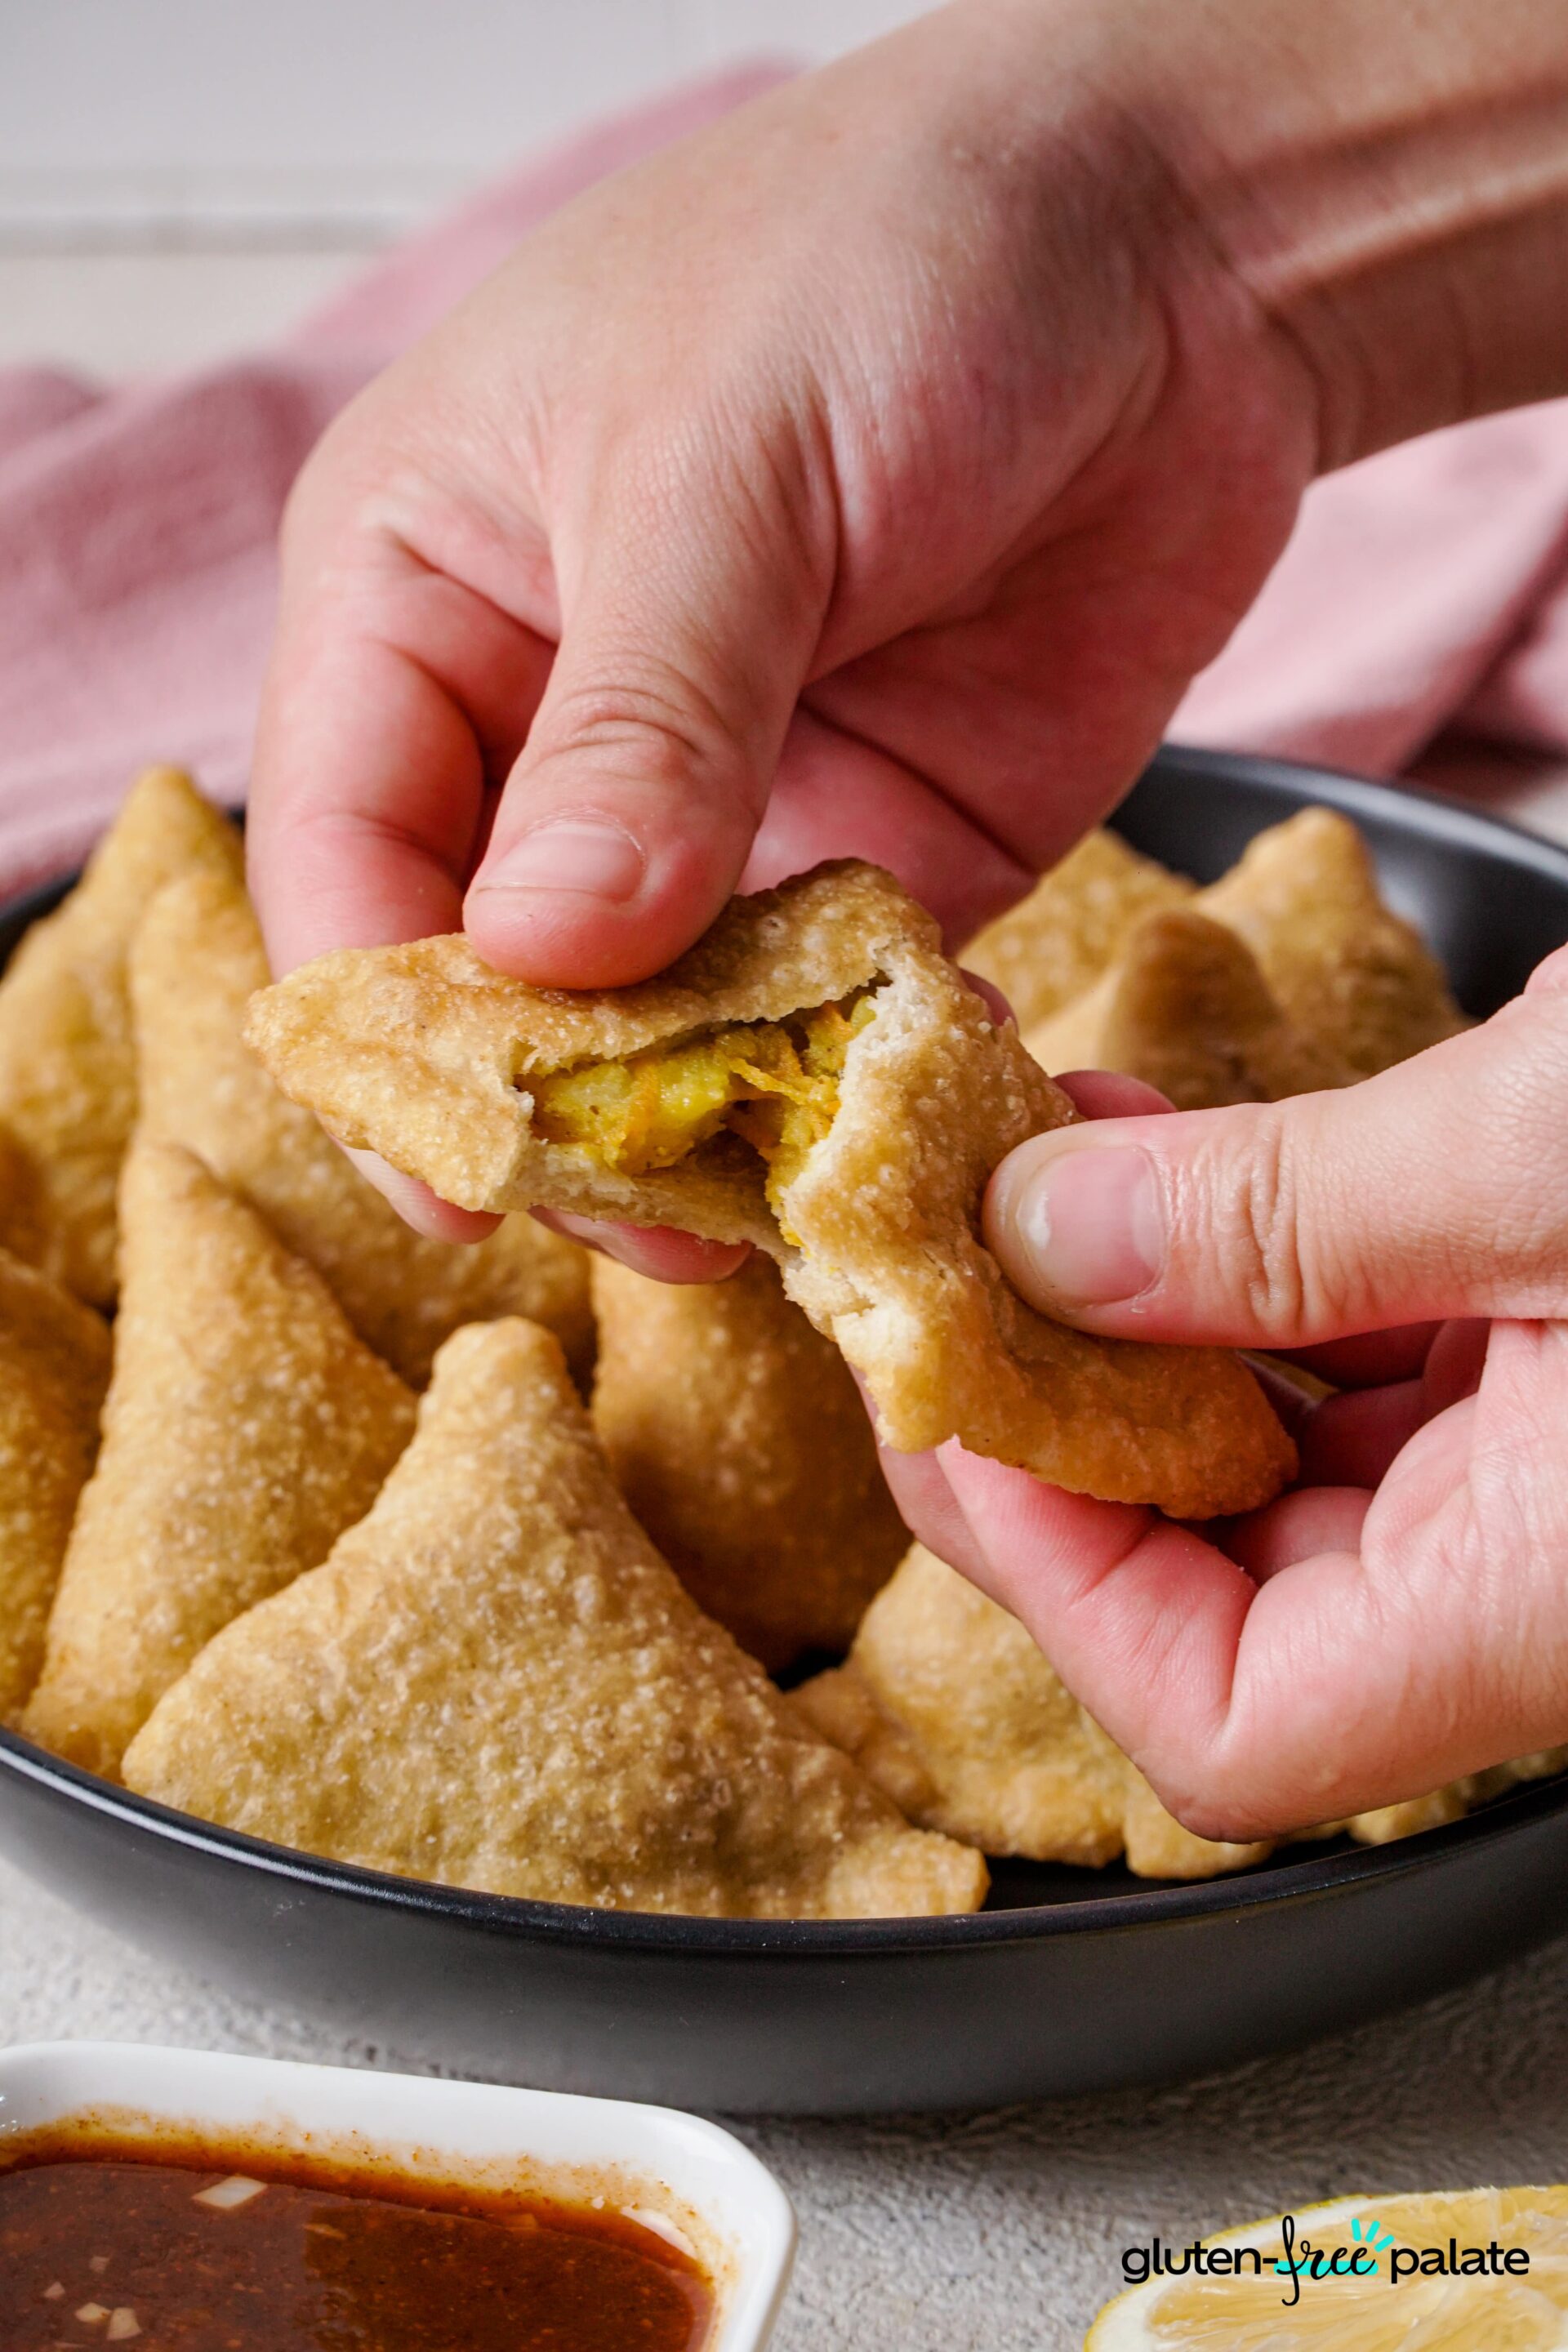 Gluten-free samosas being opened up to show the filling.